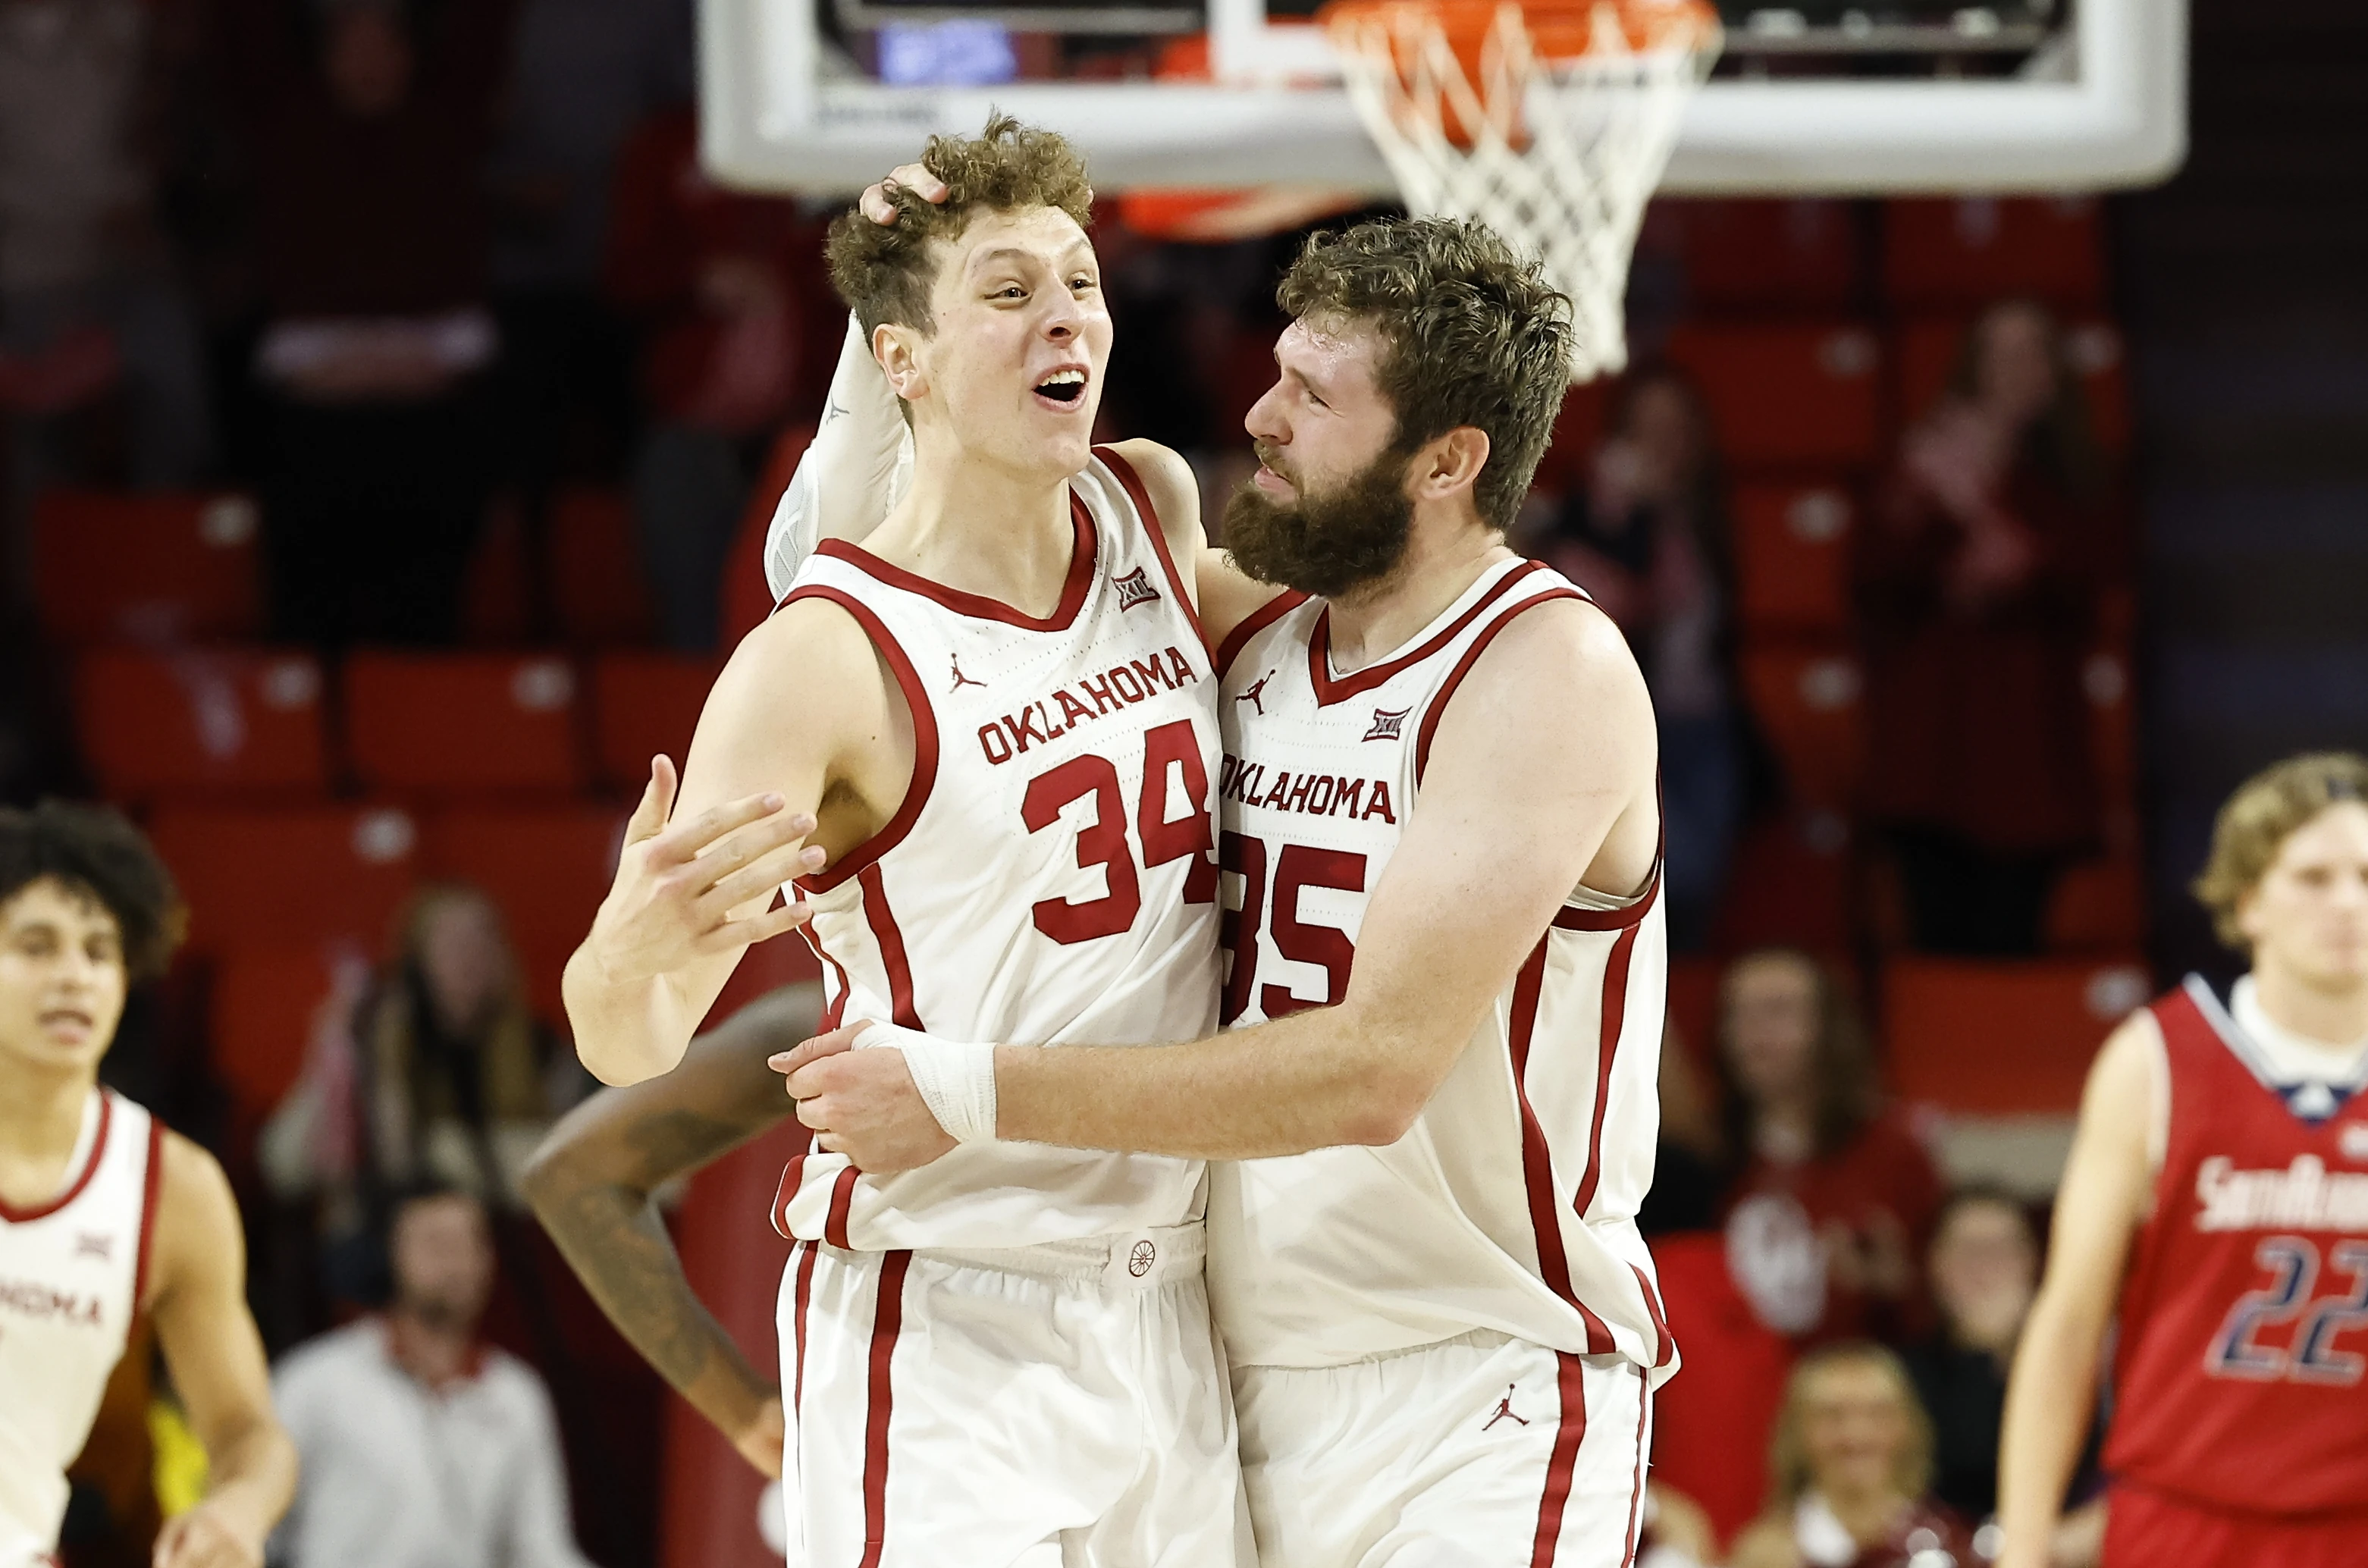 Oklahoma Sooners forward Jacob Groves (34) and forward Tanner Groves (35) celebrate after Jacob blocked a shot by South Alabama during the second half at Lloyd Noble Center. Oklahoma won 64-60.